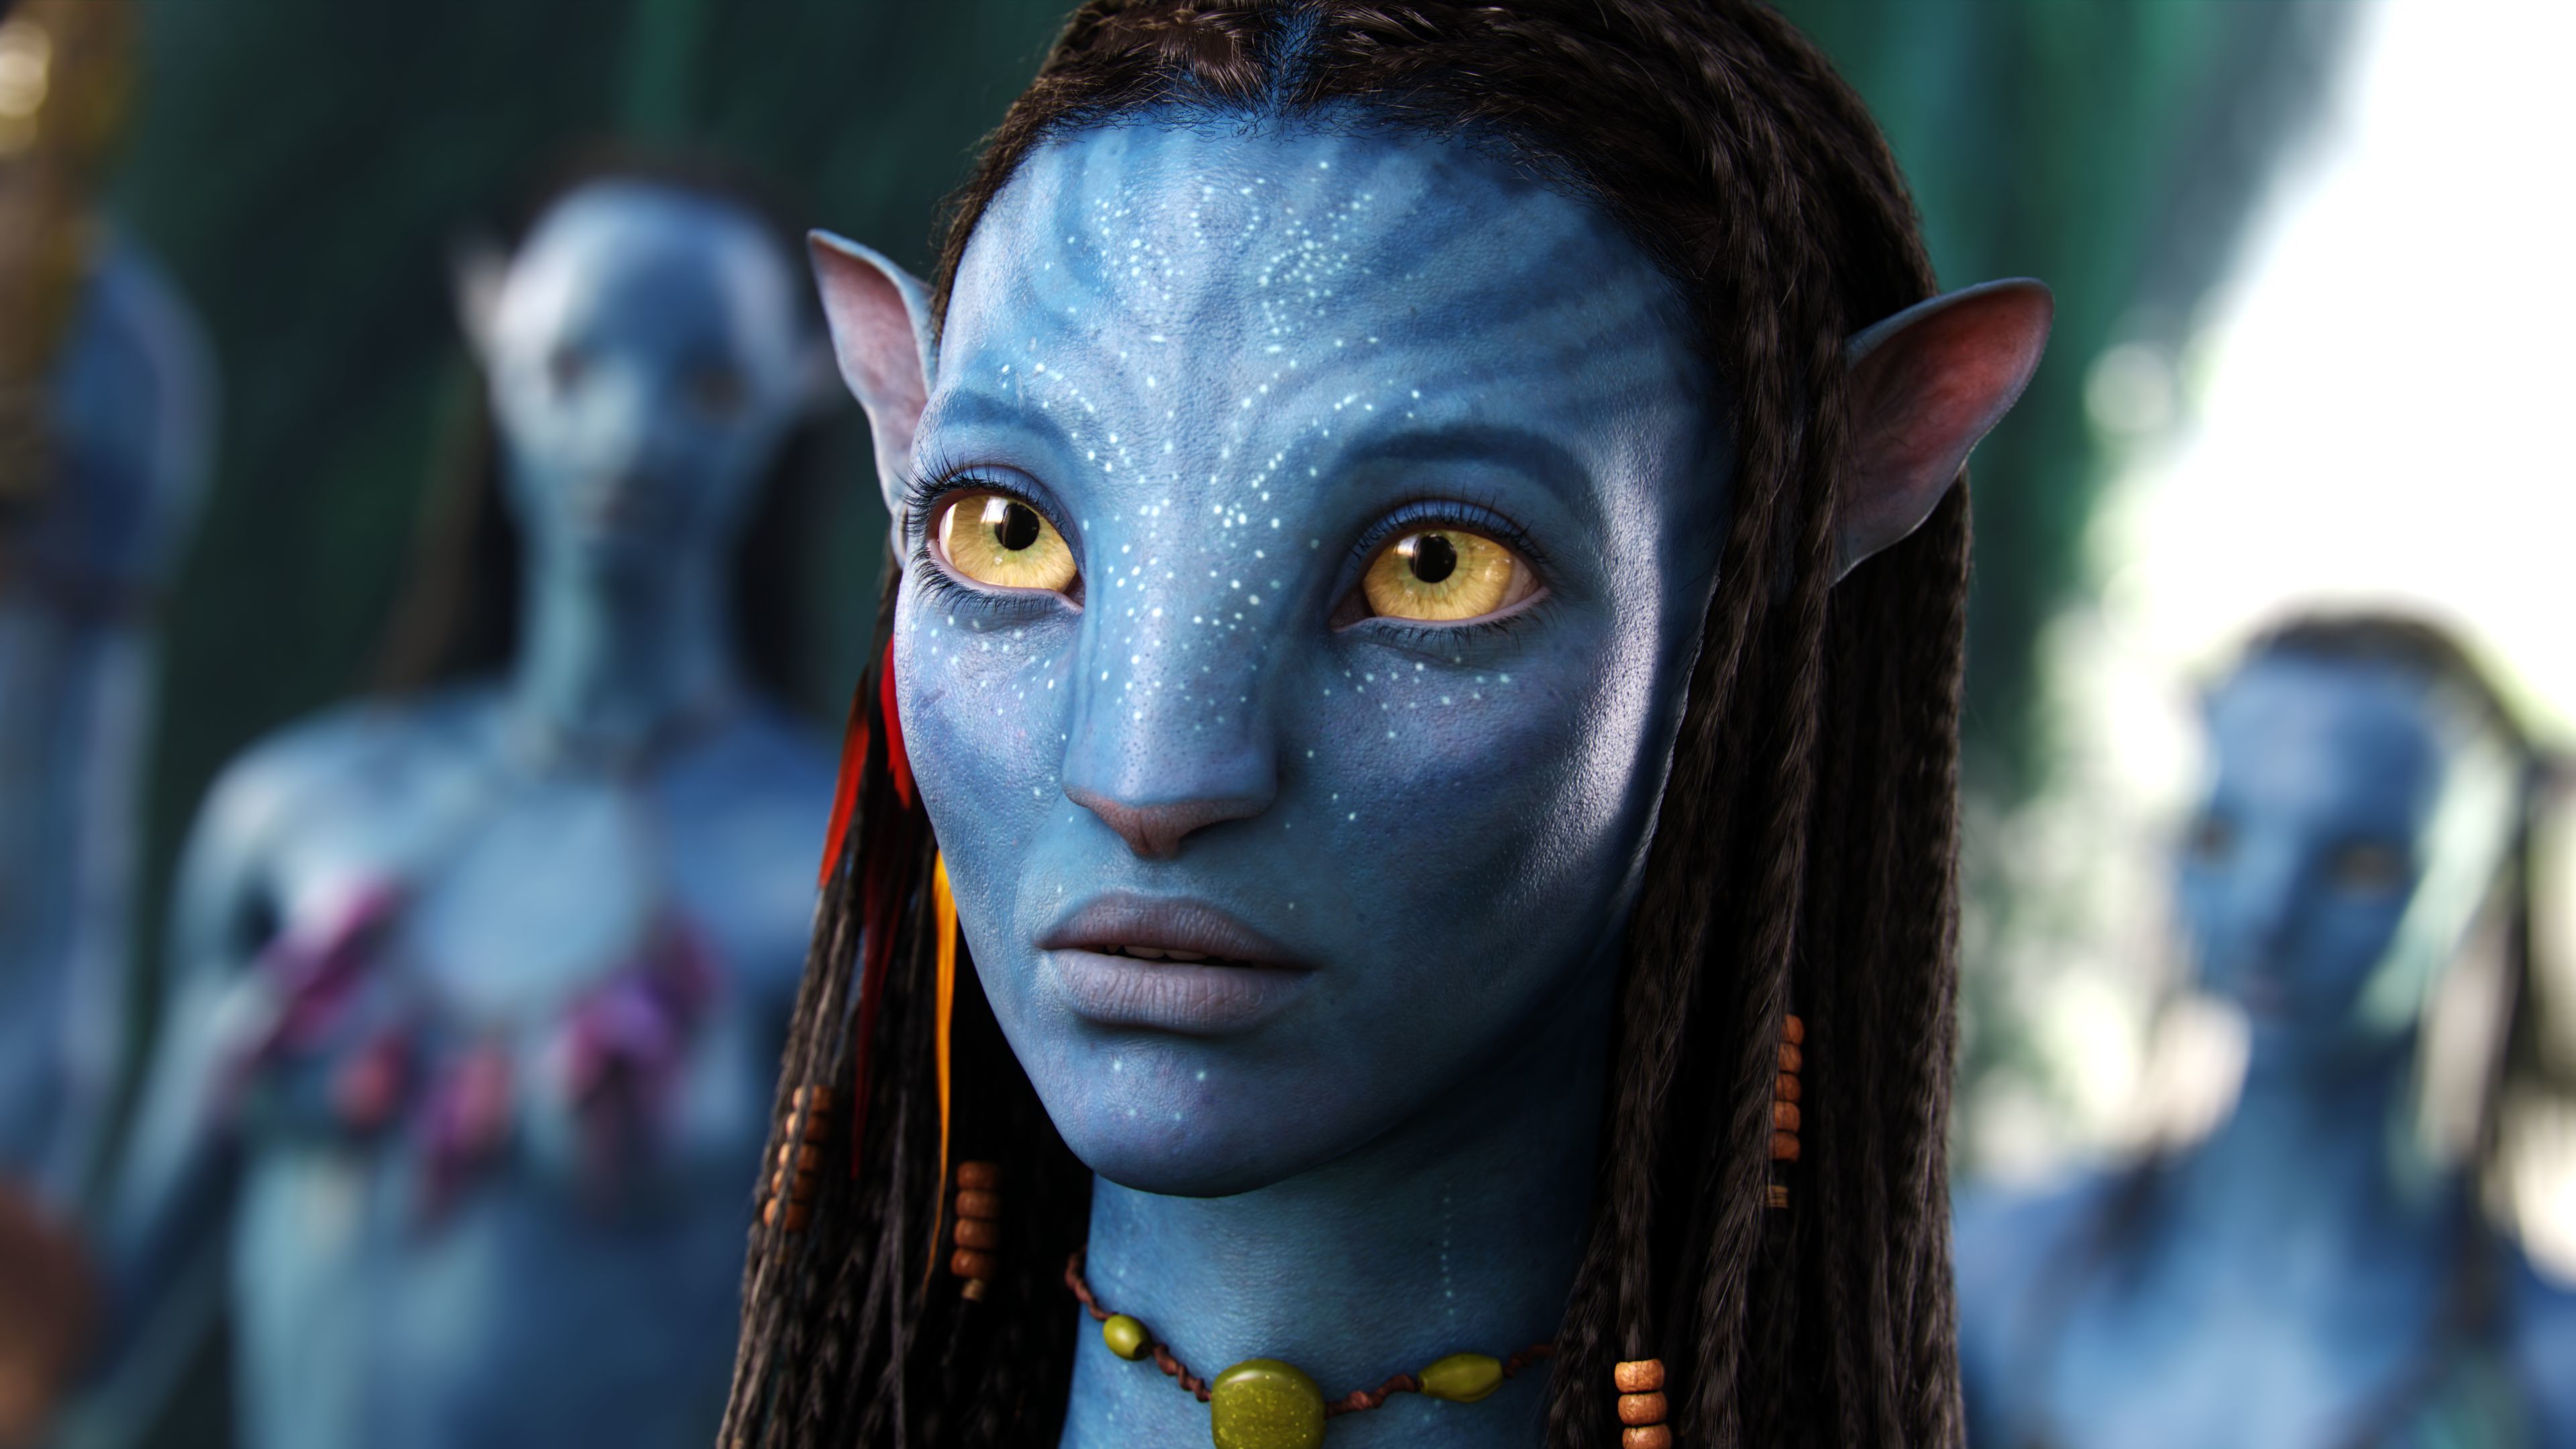 Avatar 2 release date cast trailer and plot for The Way of Water